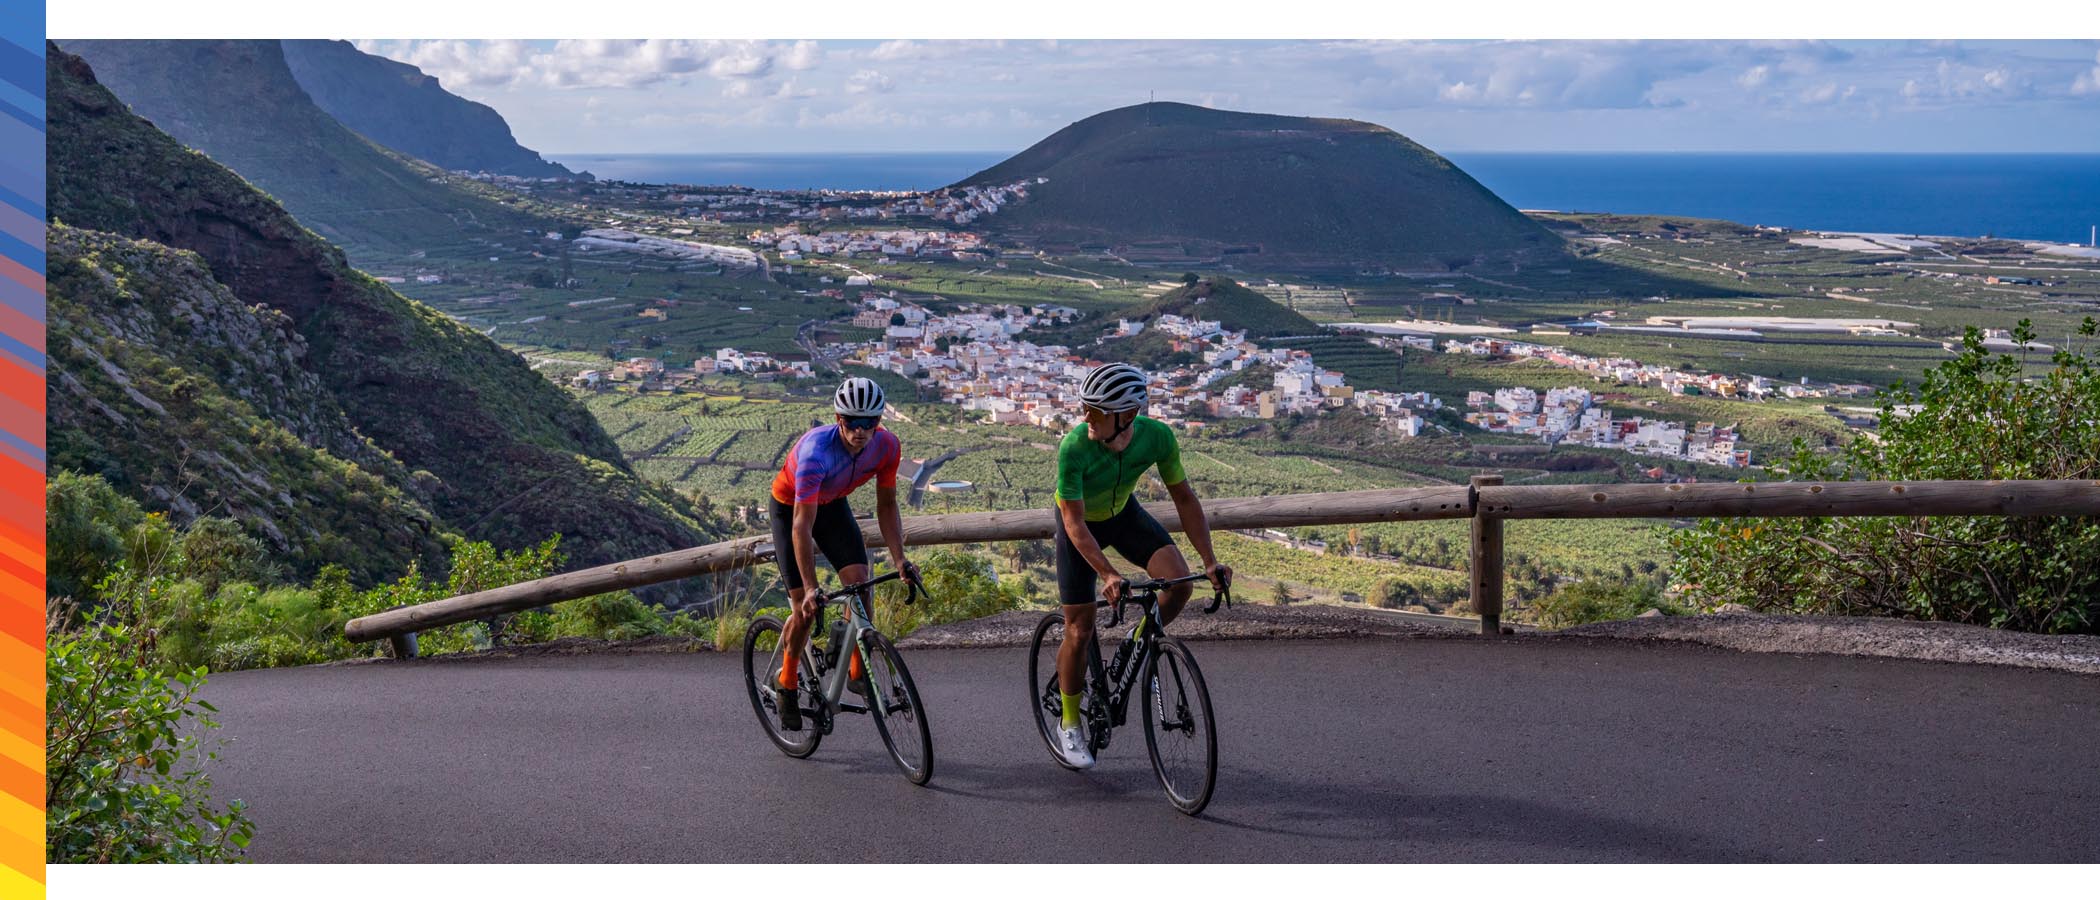 Two Luxa cyclists navigate a winding road on the beautiful island of Tenerife, with stunning scenery all around. Ready for any challenge, their high-performance gear provides comfort and style for a ride to remember